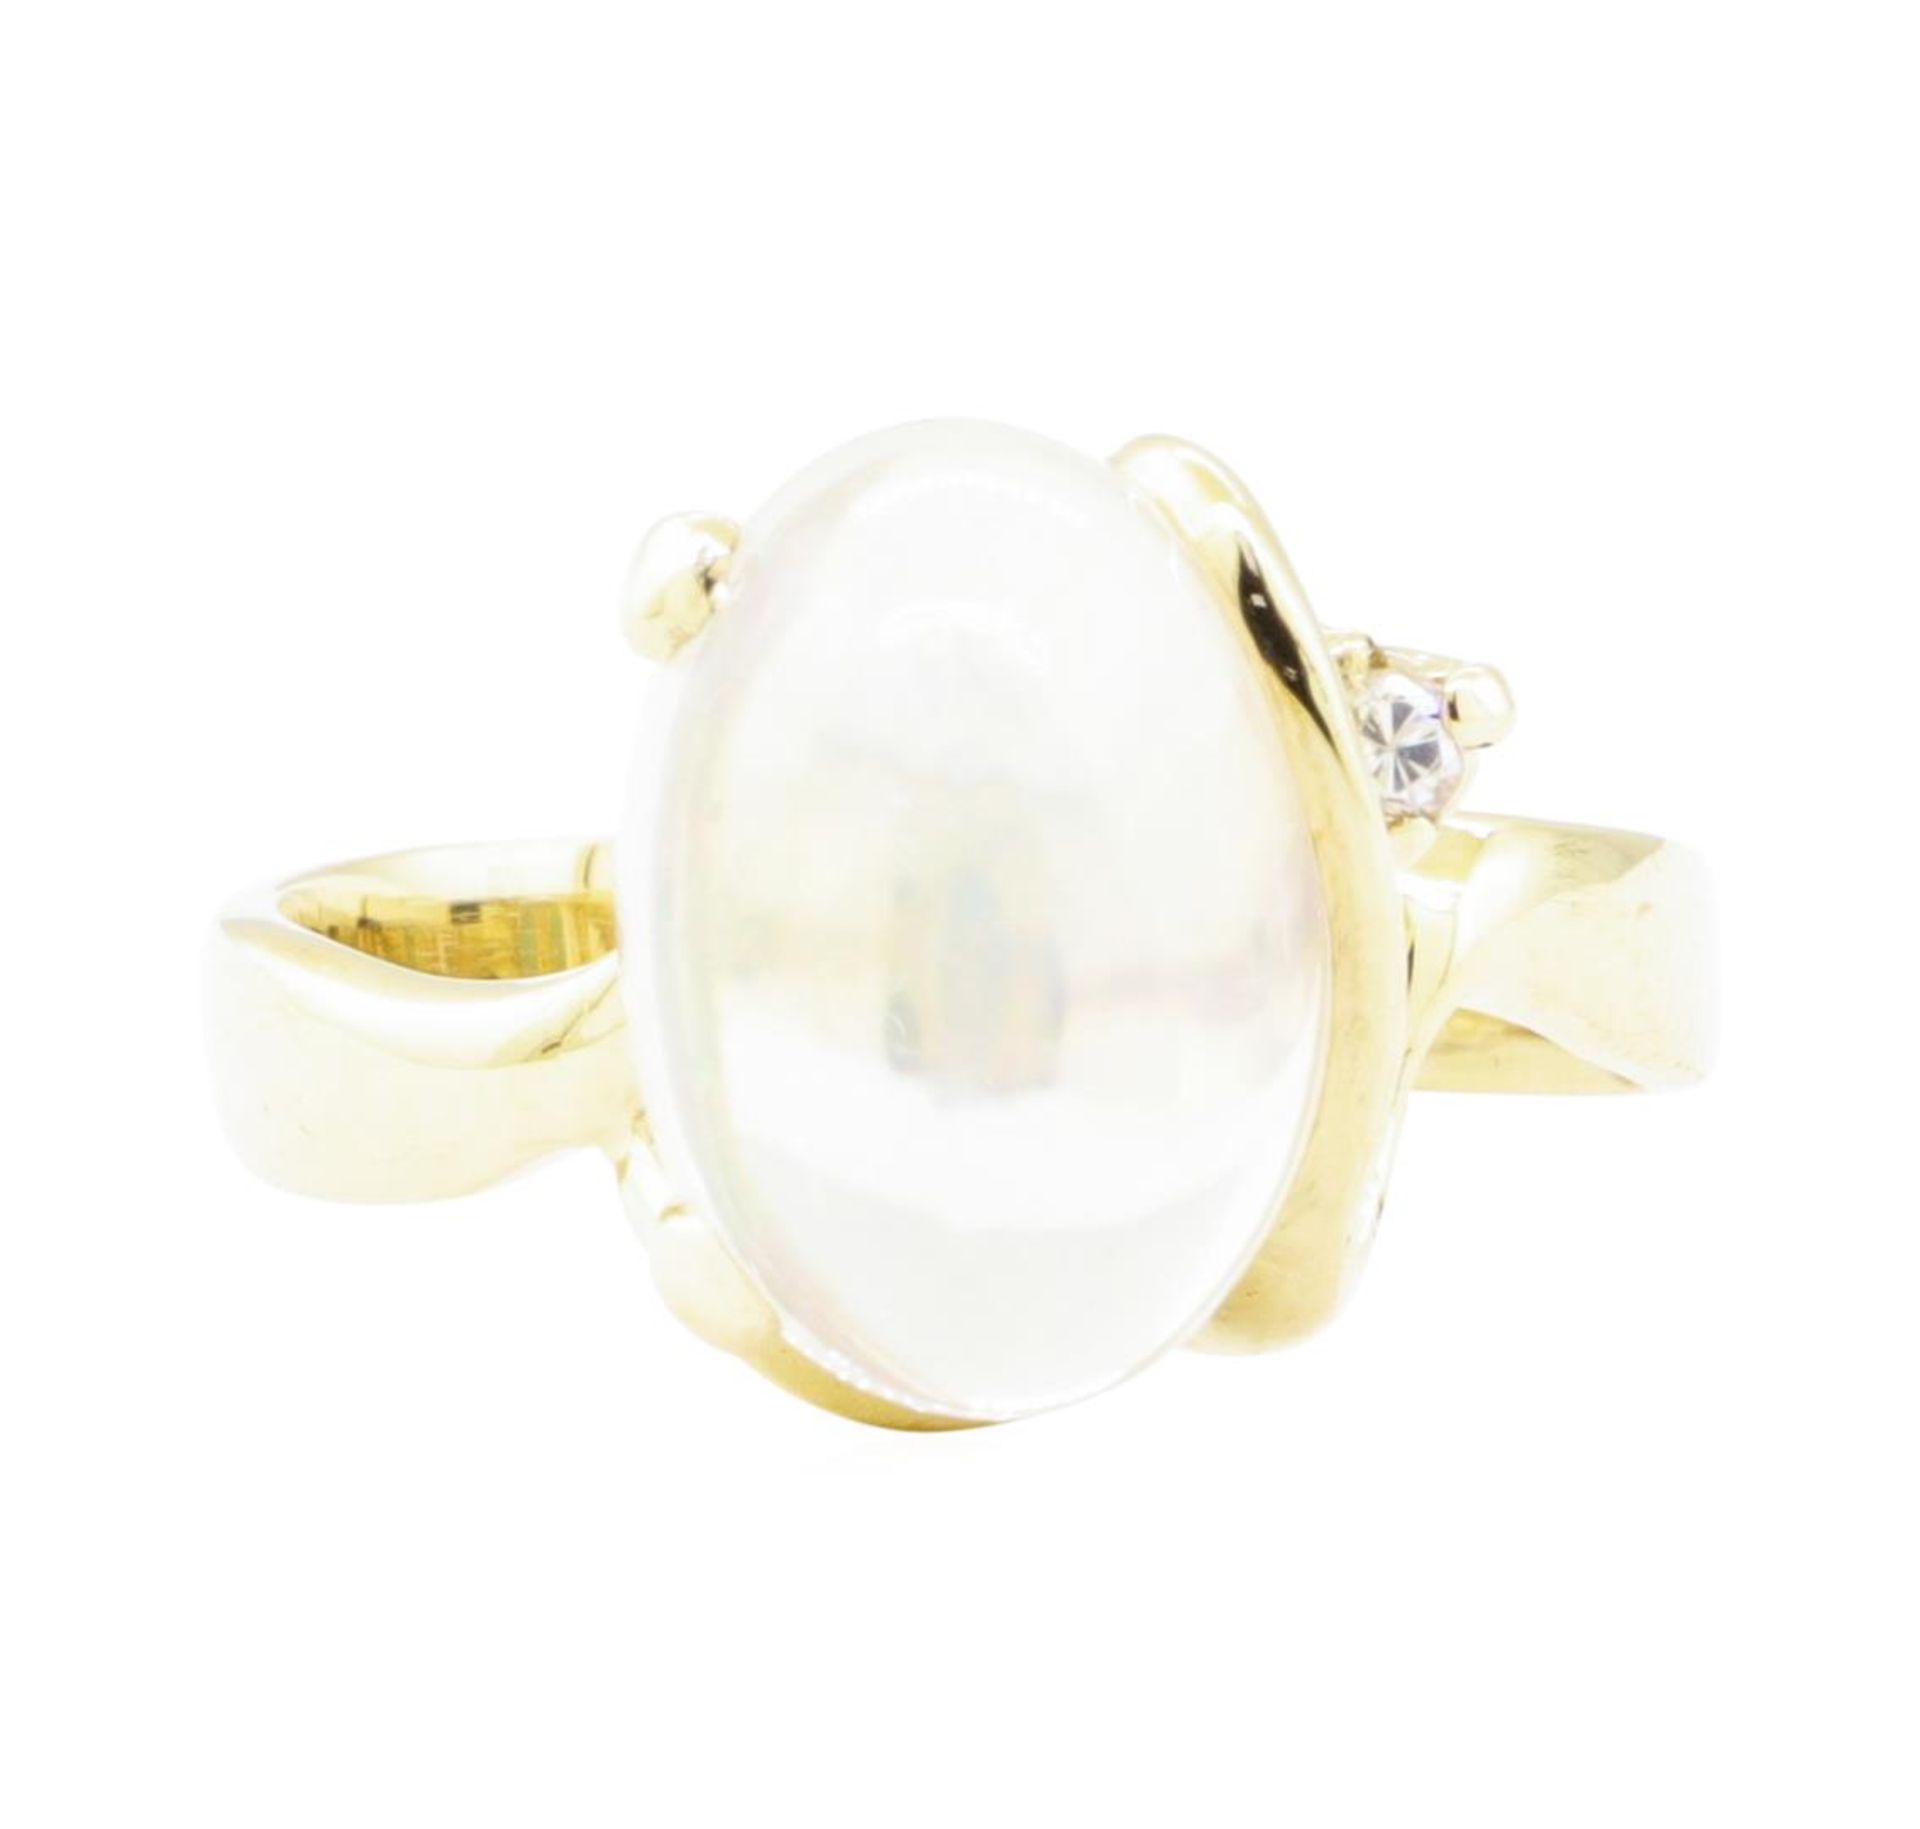 6.88ctw Opal and Diamond Ring - 14KT Yellow Gold - Image 2 of 4